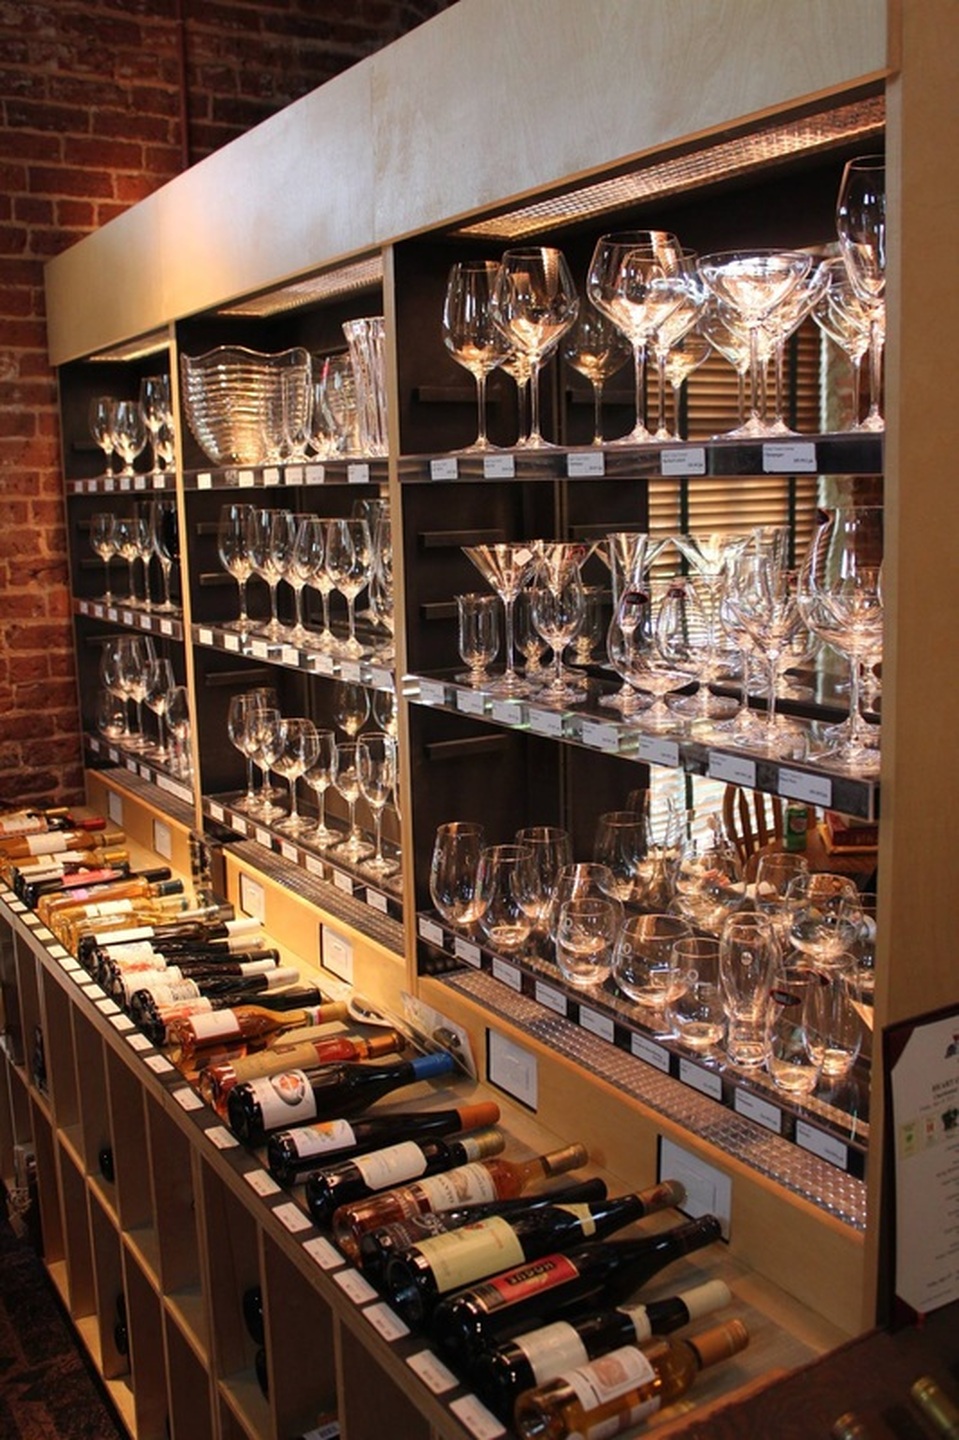 Northampton Wines Downtown Greenville SC restaurant and wine tasting and gifts and accessories